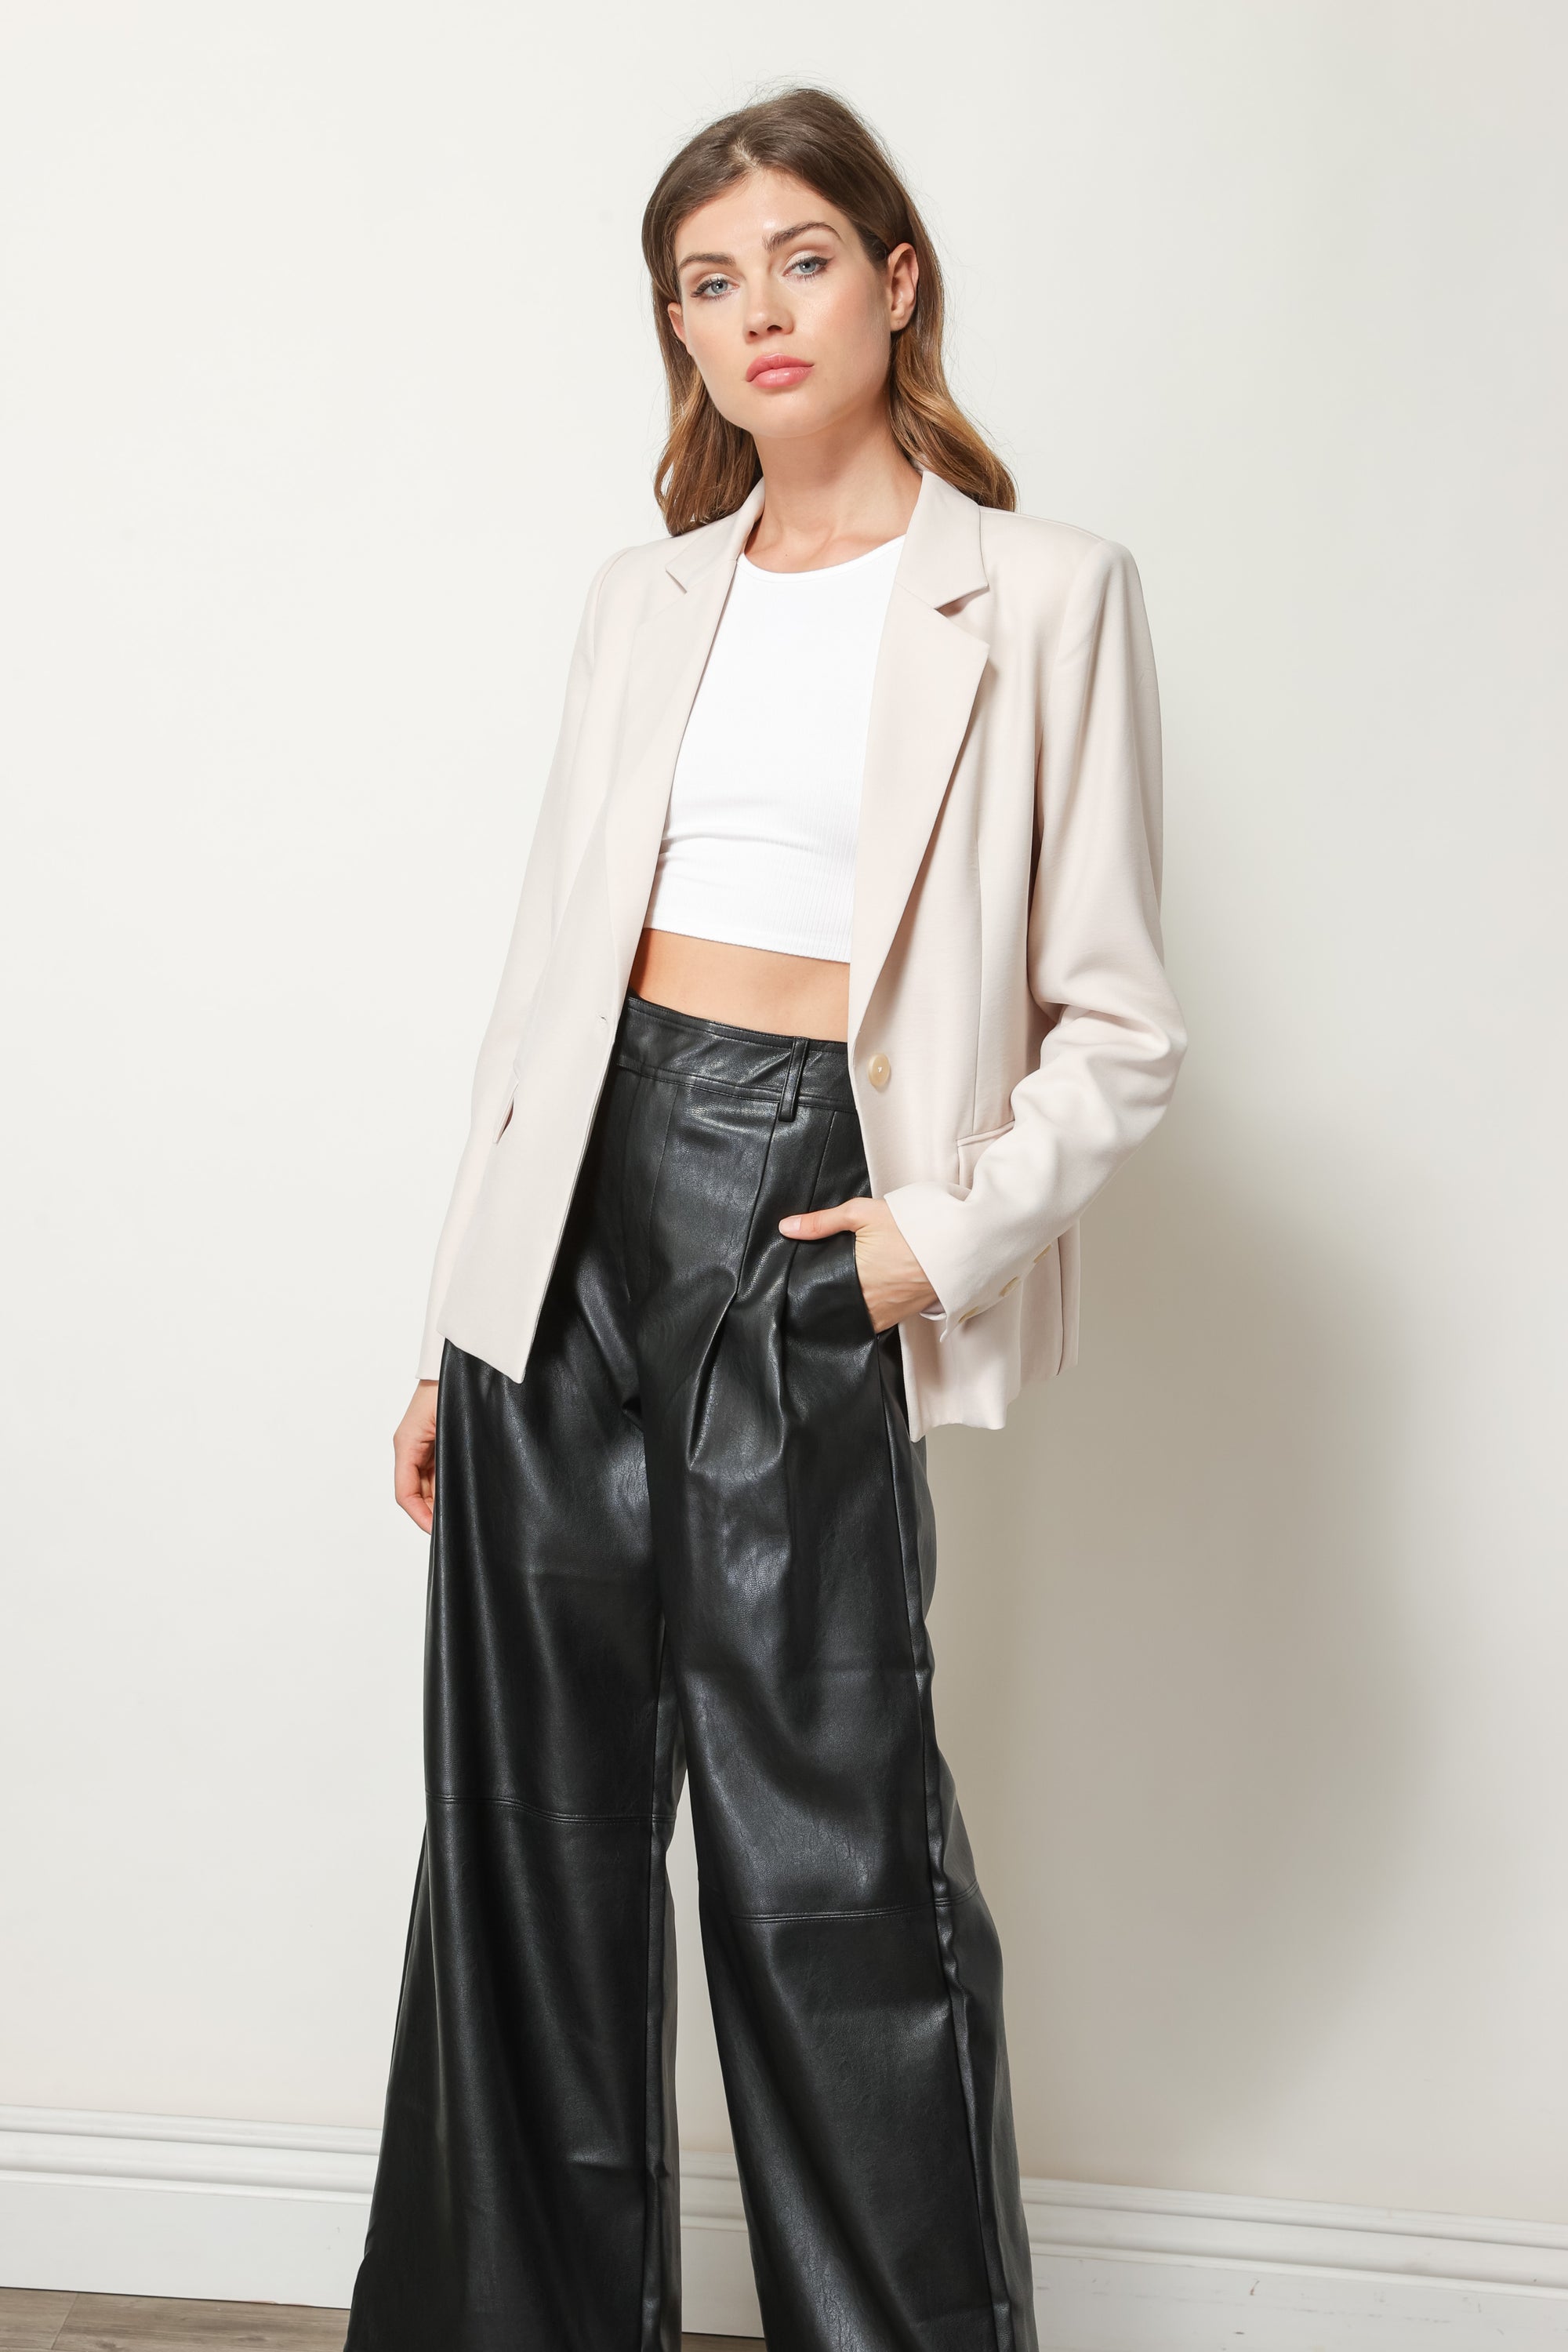 ASOS LUXE leather look skinny trouser with lace up detail in black | ASOS